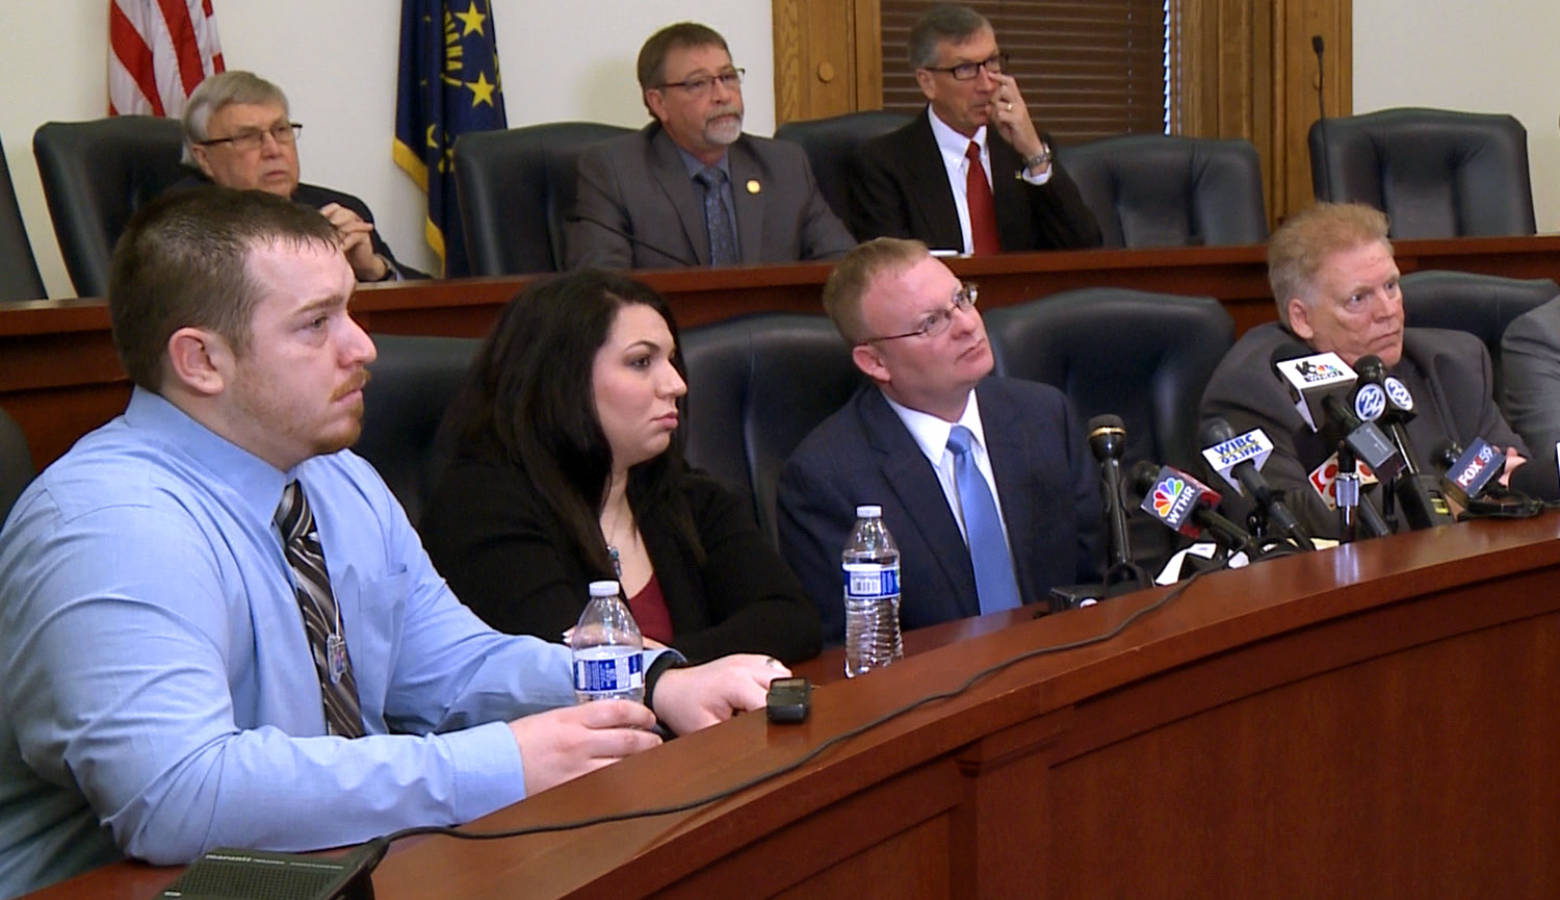 A group of lawmakers joined Shane and Brittany Ingle and Michael Schwab, the family of the three children killed October, at a meeting Tuesday to announce and advocate for bus safety-focused legislation. (Tyler Lake/WTIU)